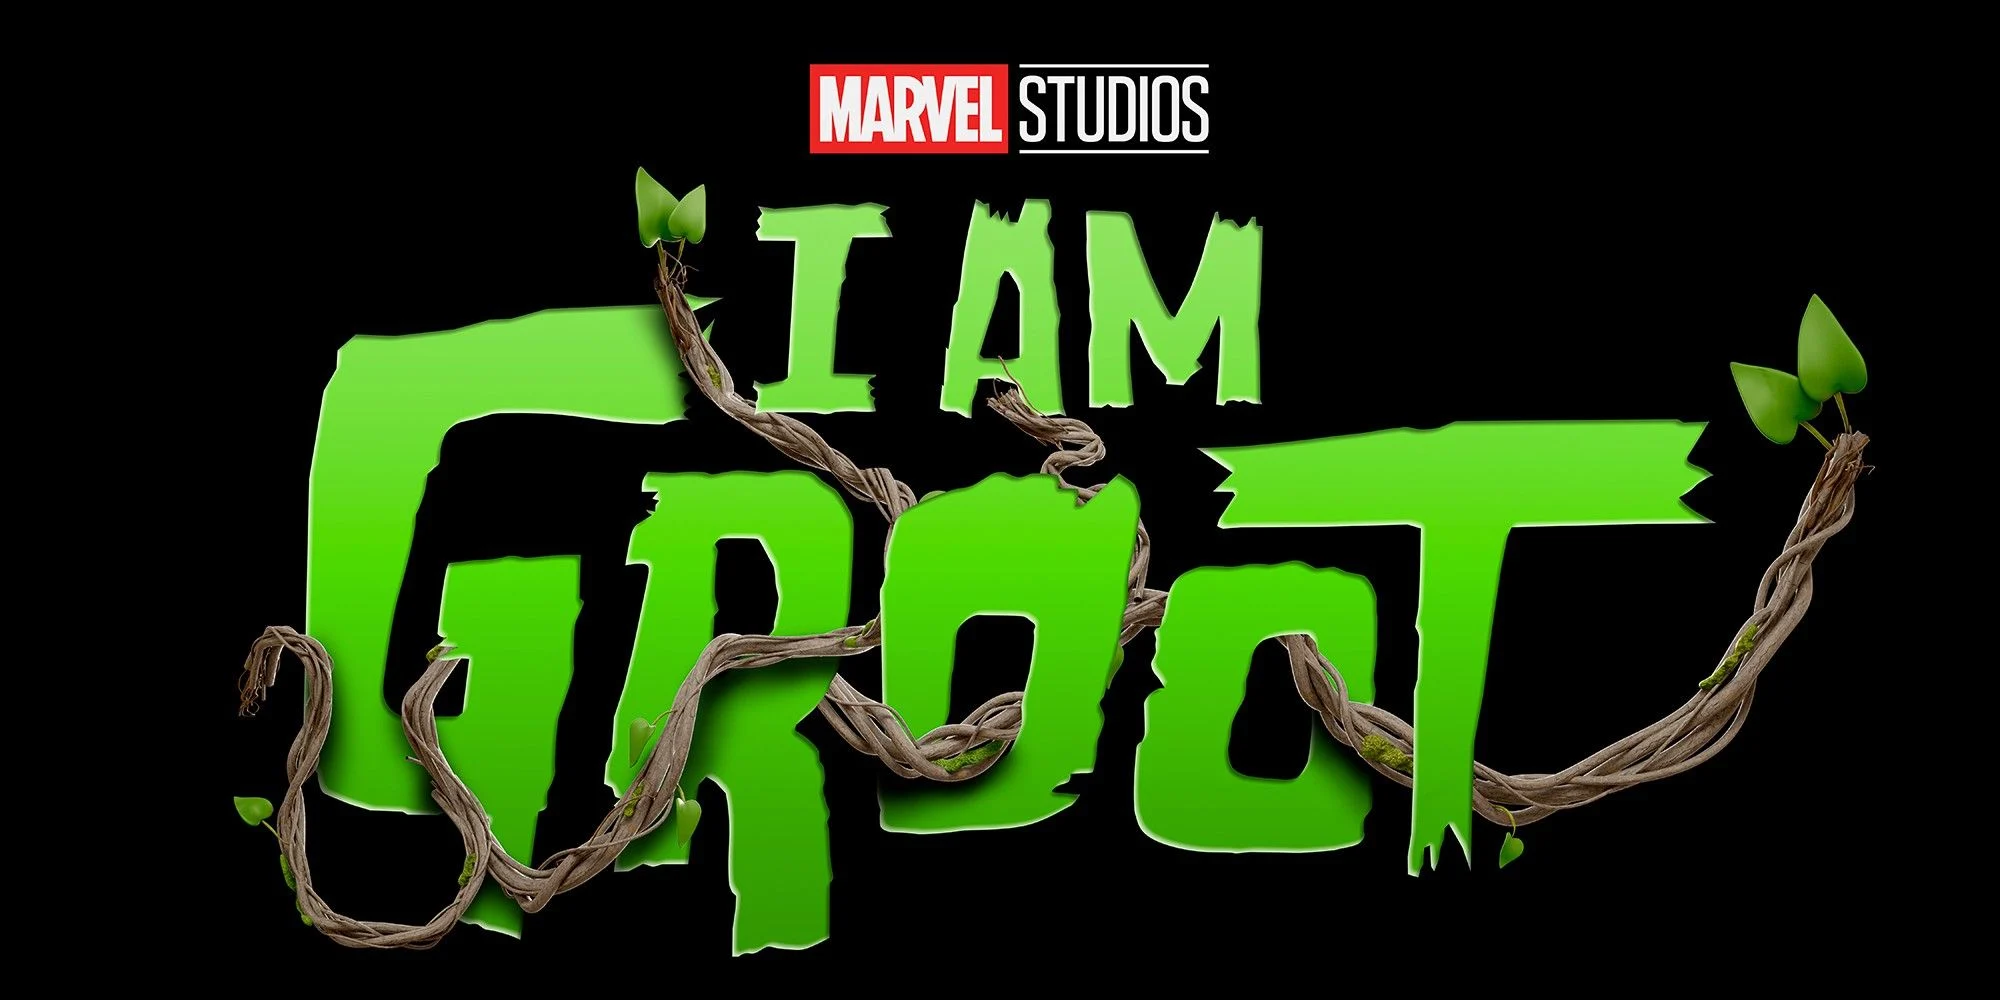 Was A Possible "I Am Groot" Release Date Hinted At?